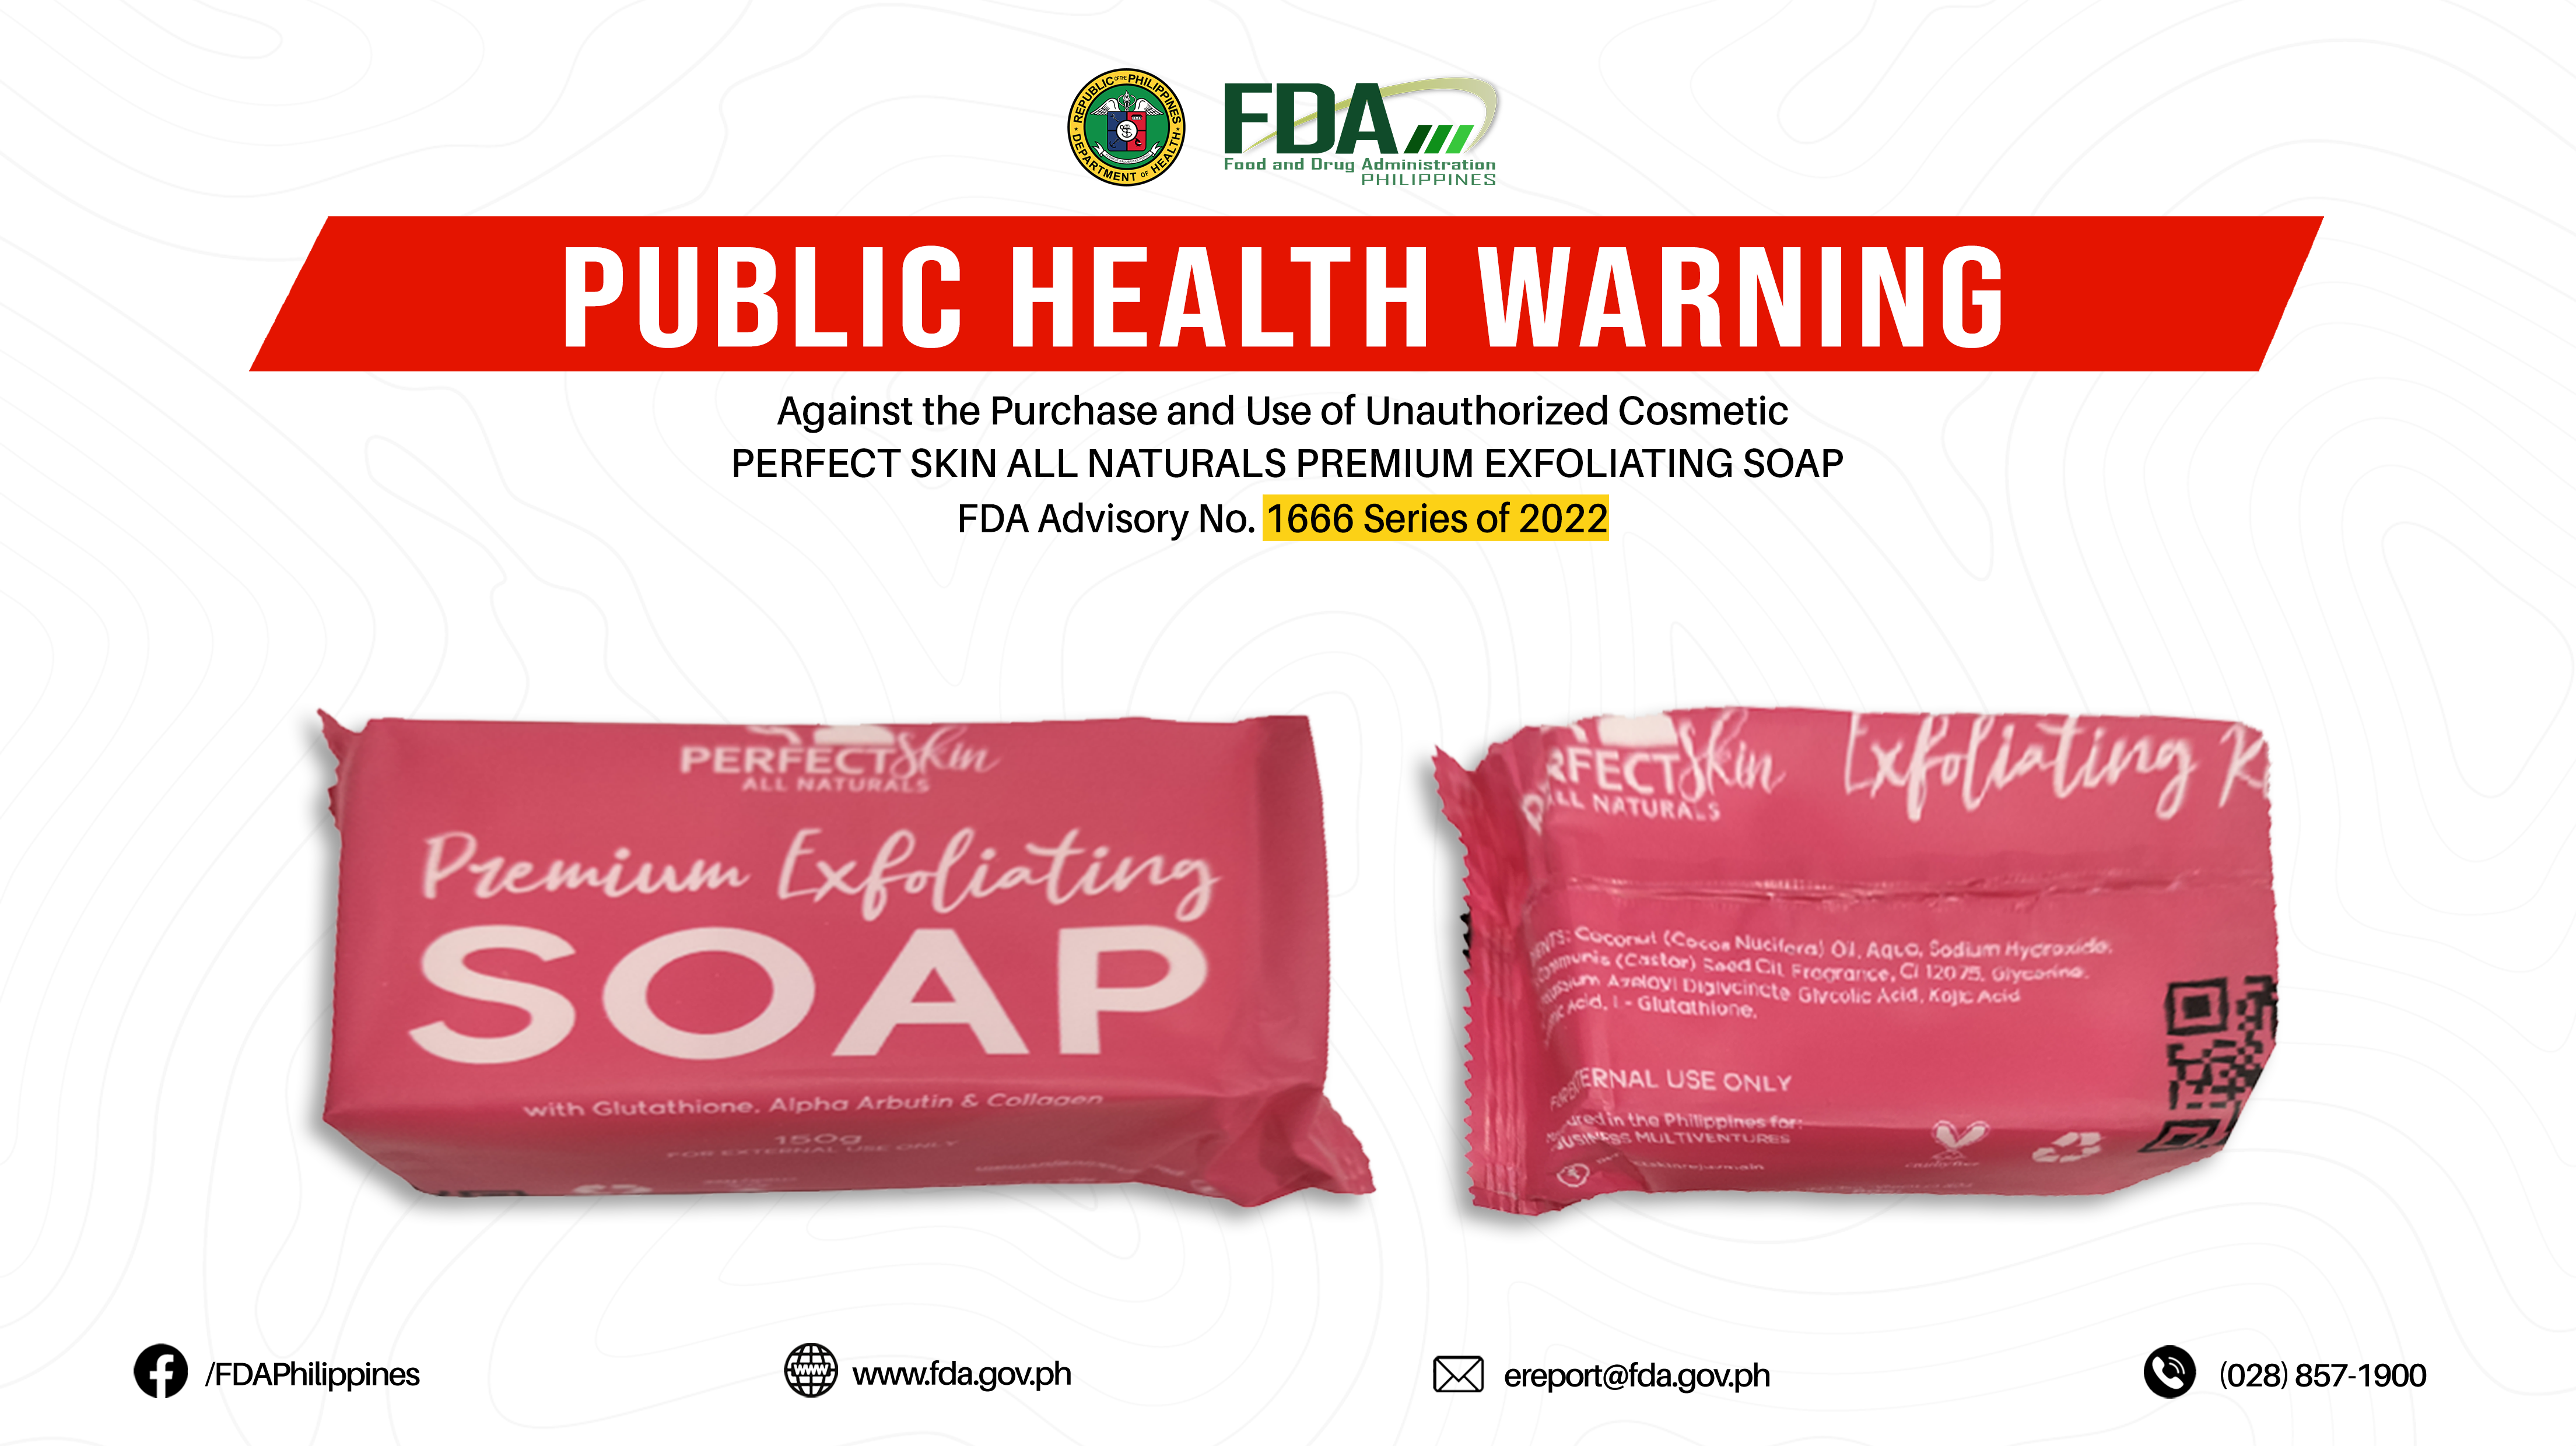 FDA Advisory No.2022-1666 || Public Health Warning Against the Purchase and Use of Unauthorized Cosmetic PERFECT SKIN ALL NATURALS PREMIUM EXFOLIATING SOAP